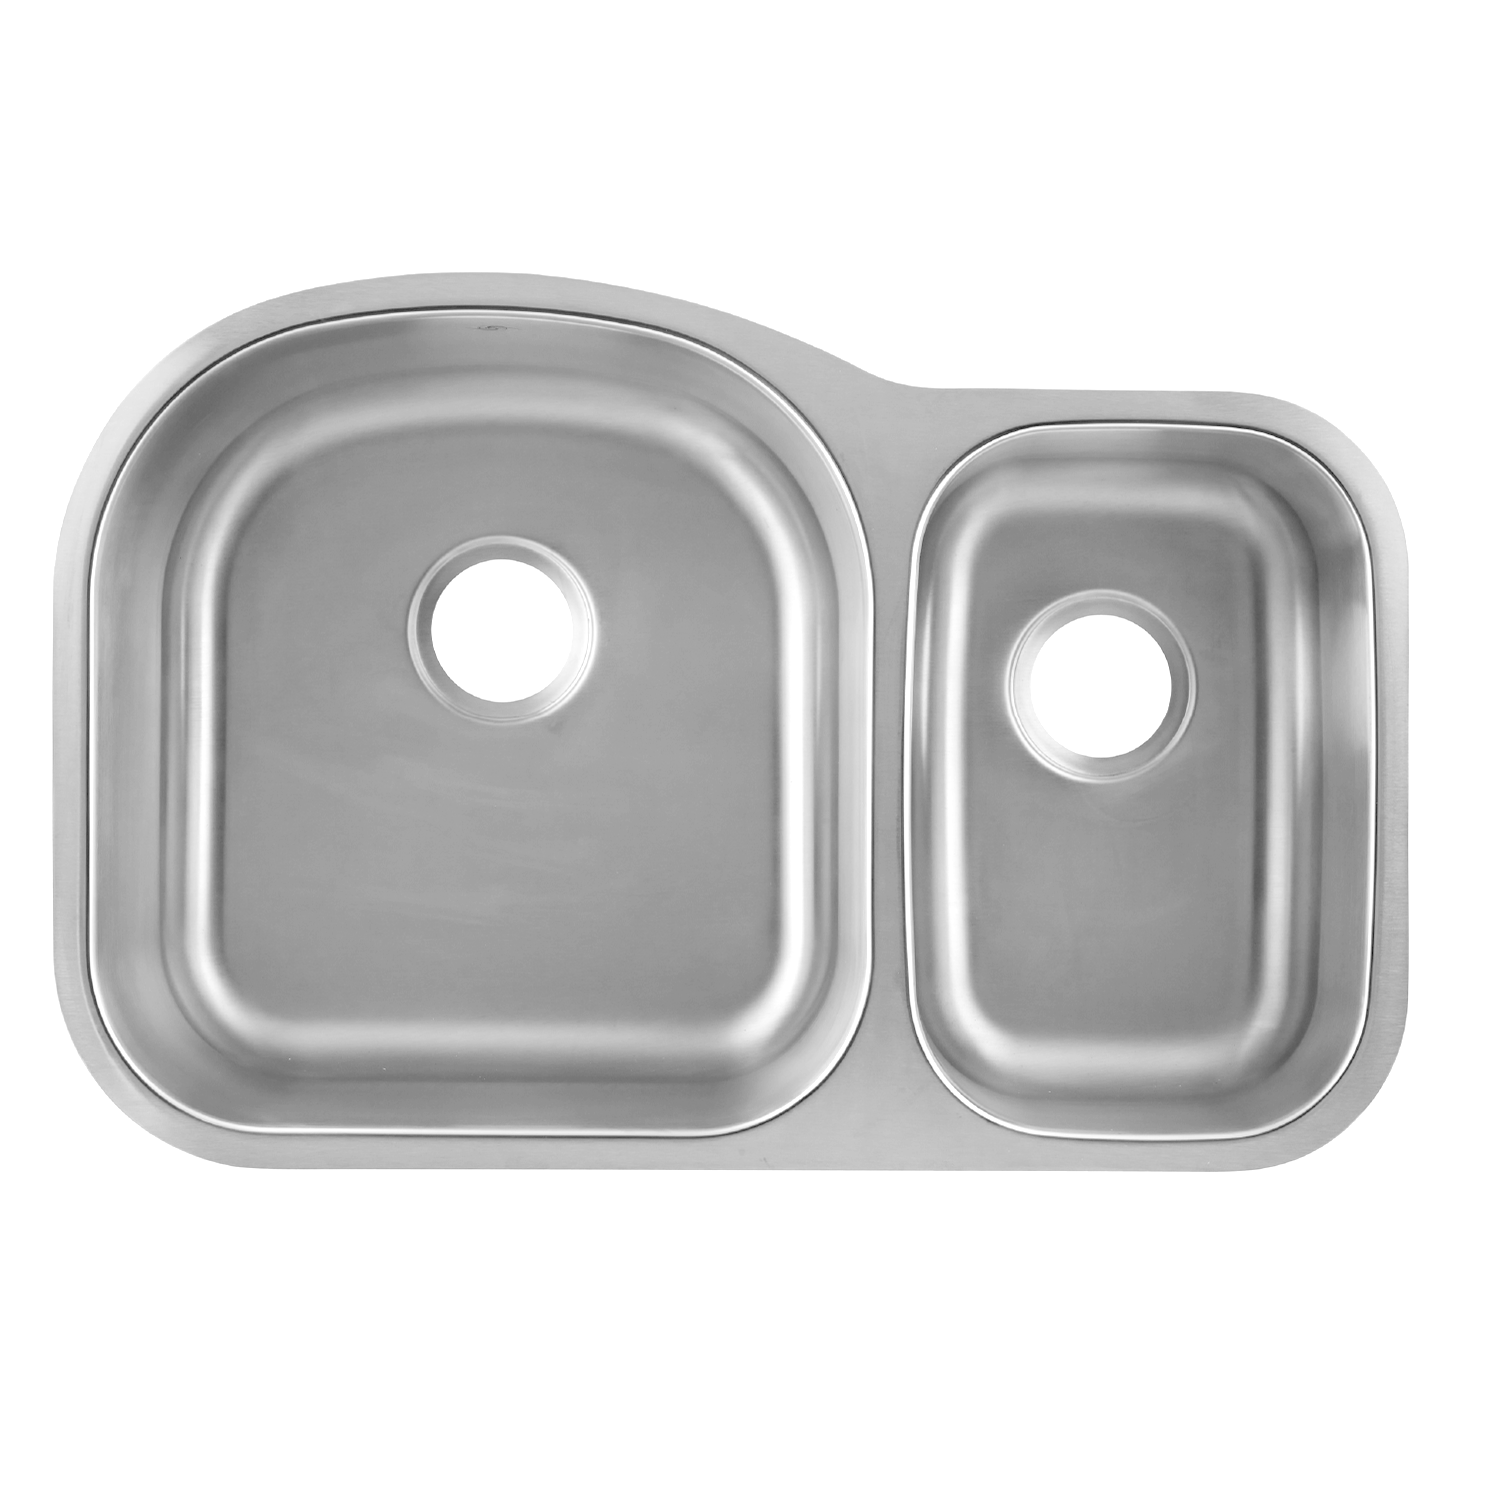 DAX 70/30 Double Bowl Undermount Kitchen Sink, 18 Gauge Stainless Steel, Brushed Finish , 31-1/2 x 20-1/2 x 9 Inches (DAX-3121L)